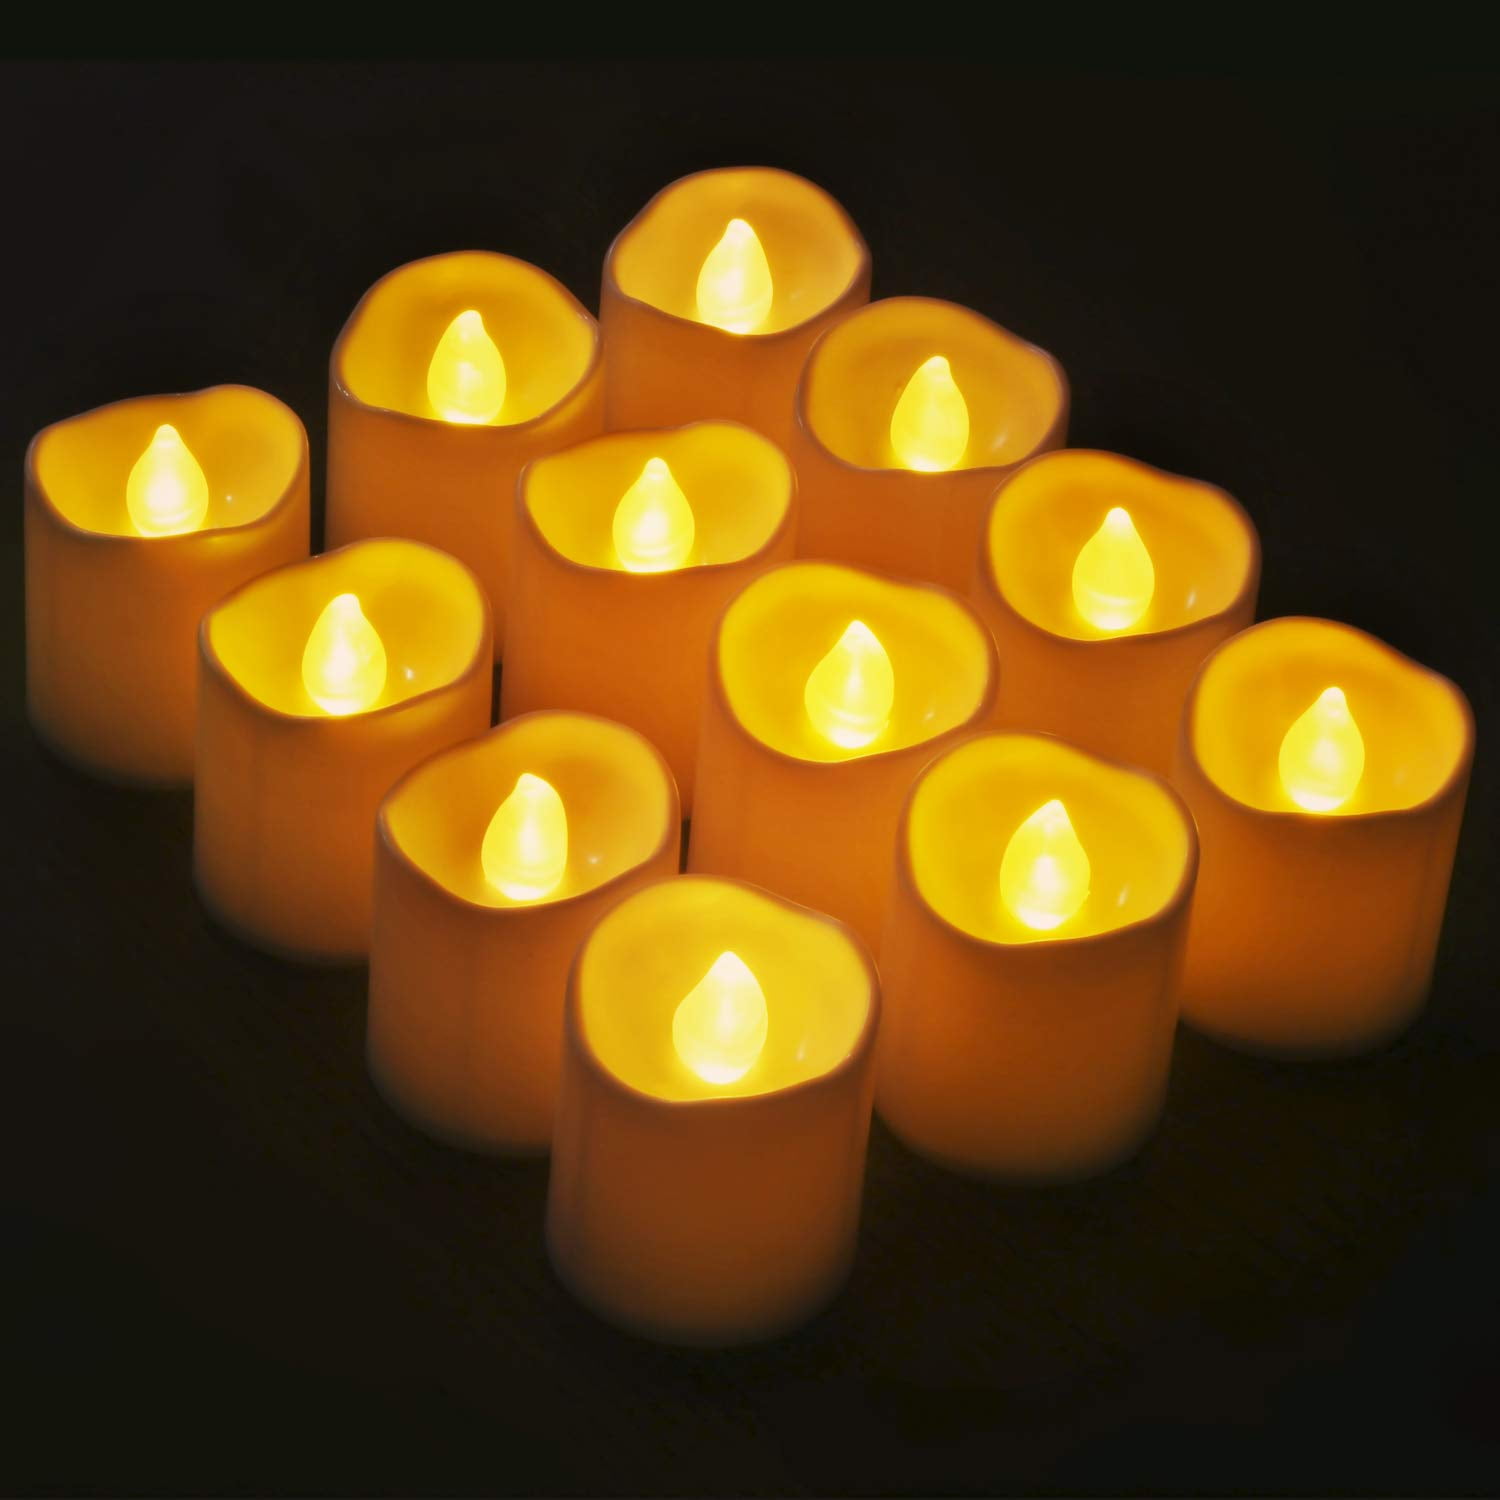 24pcs Realistic and Bright Battery Operated Flickering Tealights Tea Lights, 